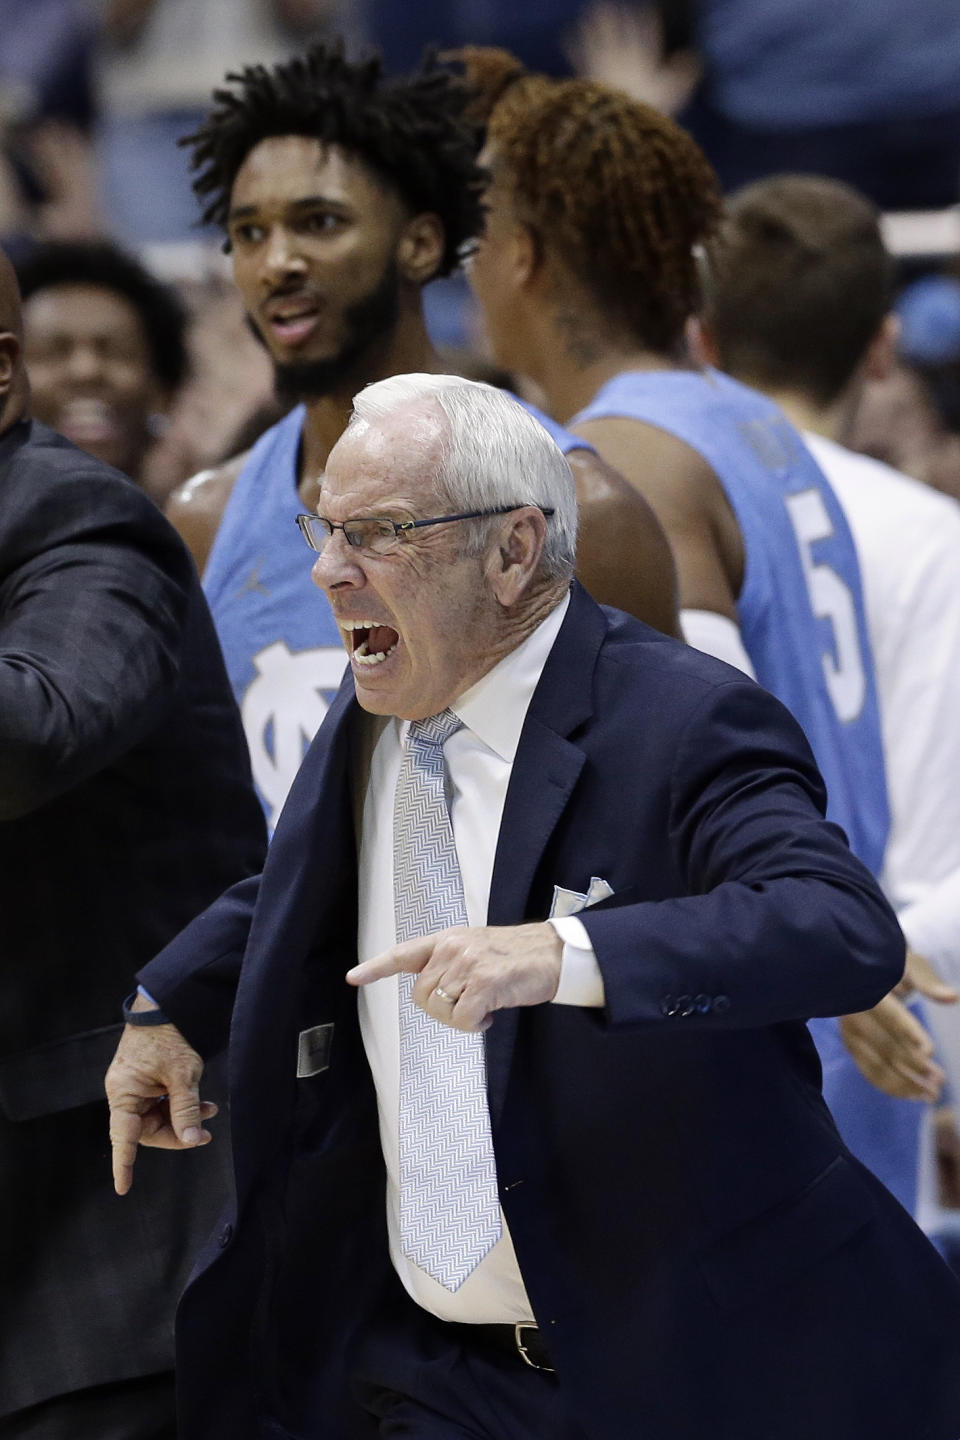 North Carolina head coach Roy Williams reacts during the second half of an NCAA college basketball game against Duke in Chapel Hill, N.C., Saturday, Feb. 8, 2020. (AP Photo/Gerry Broome)